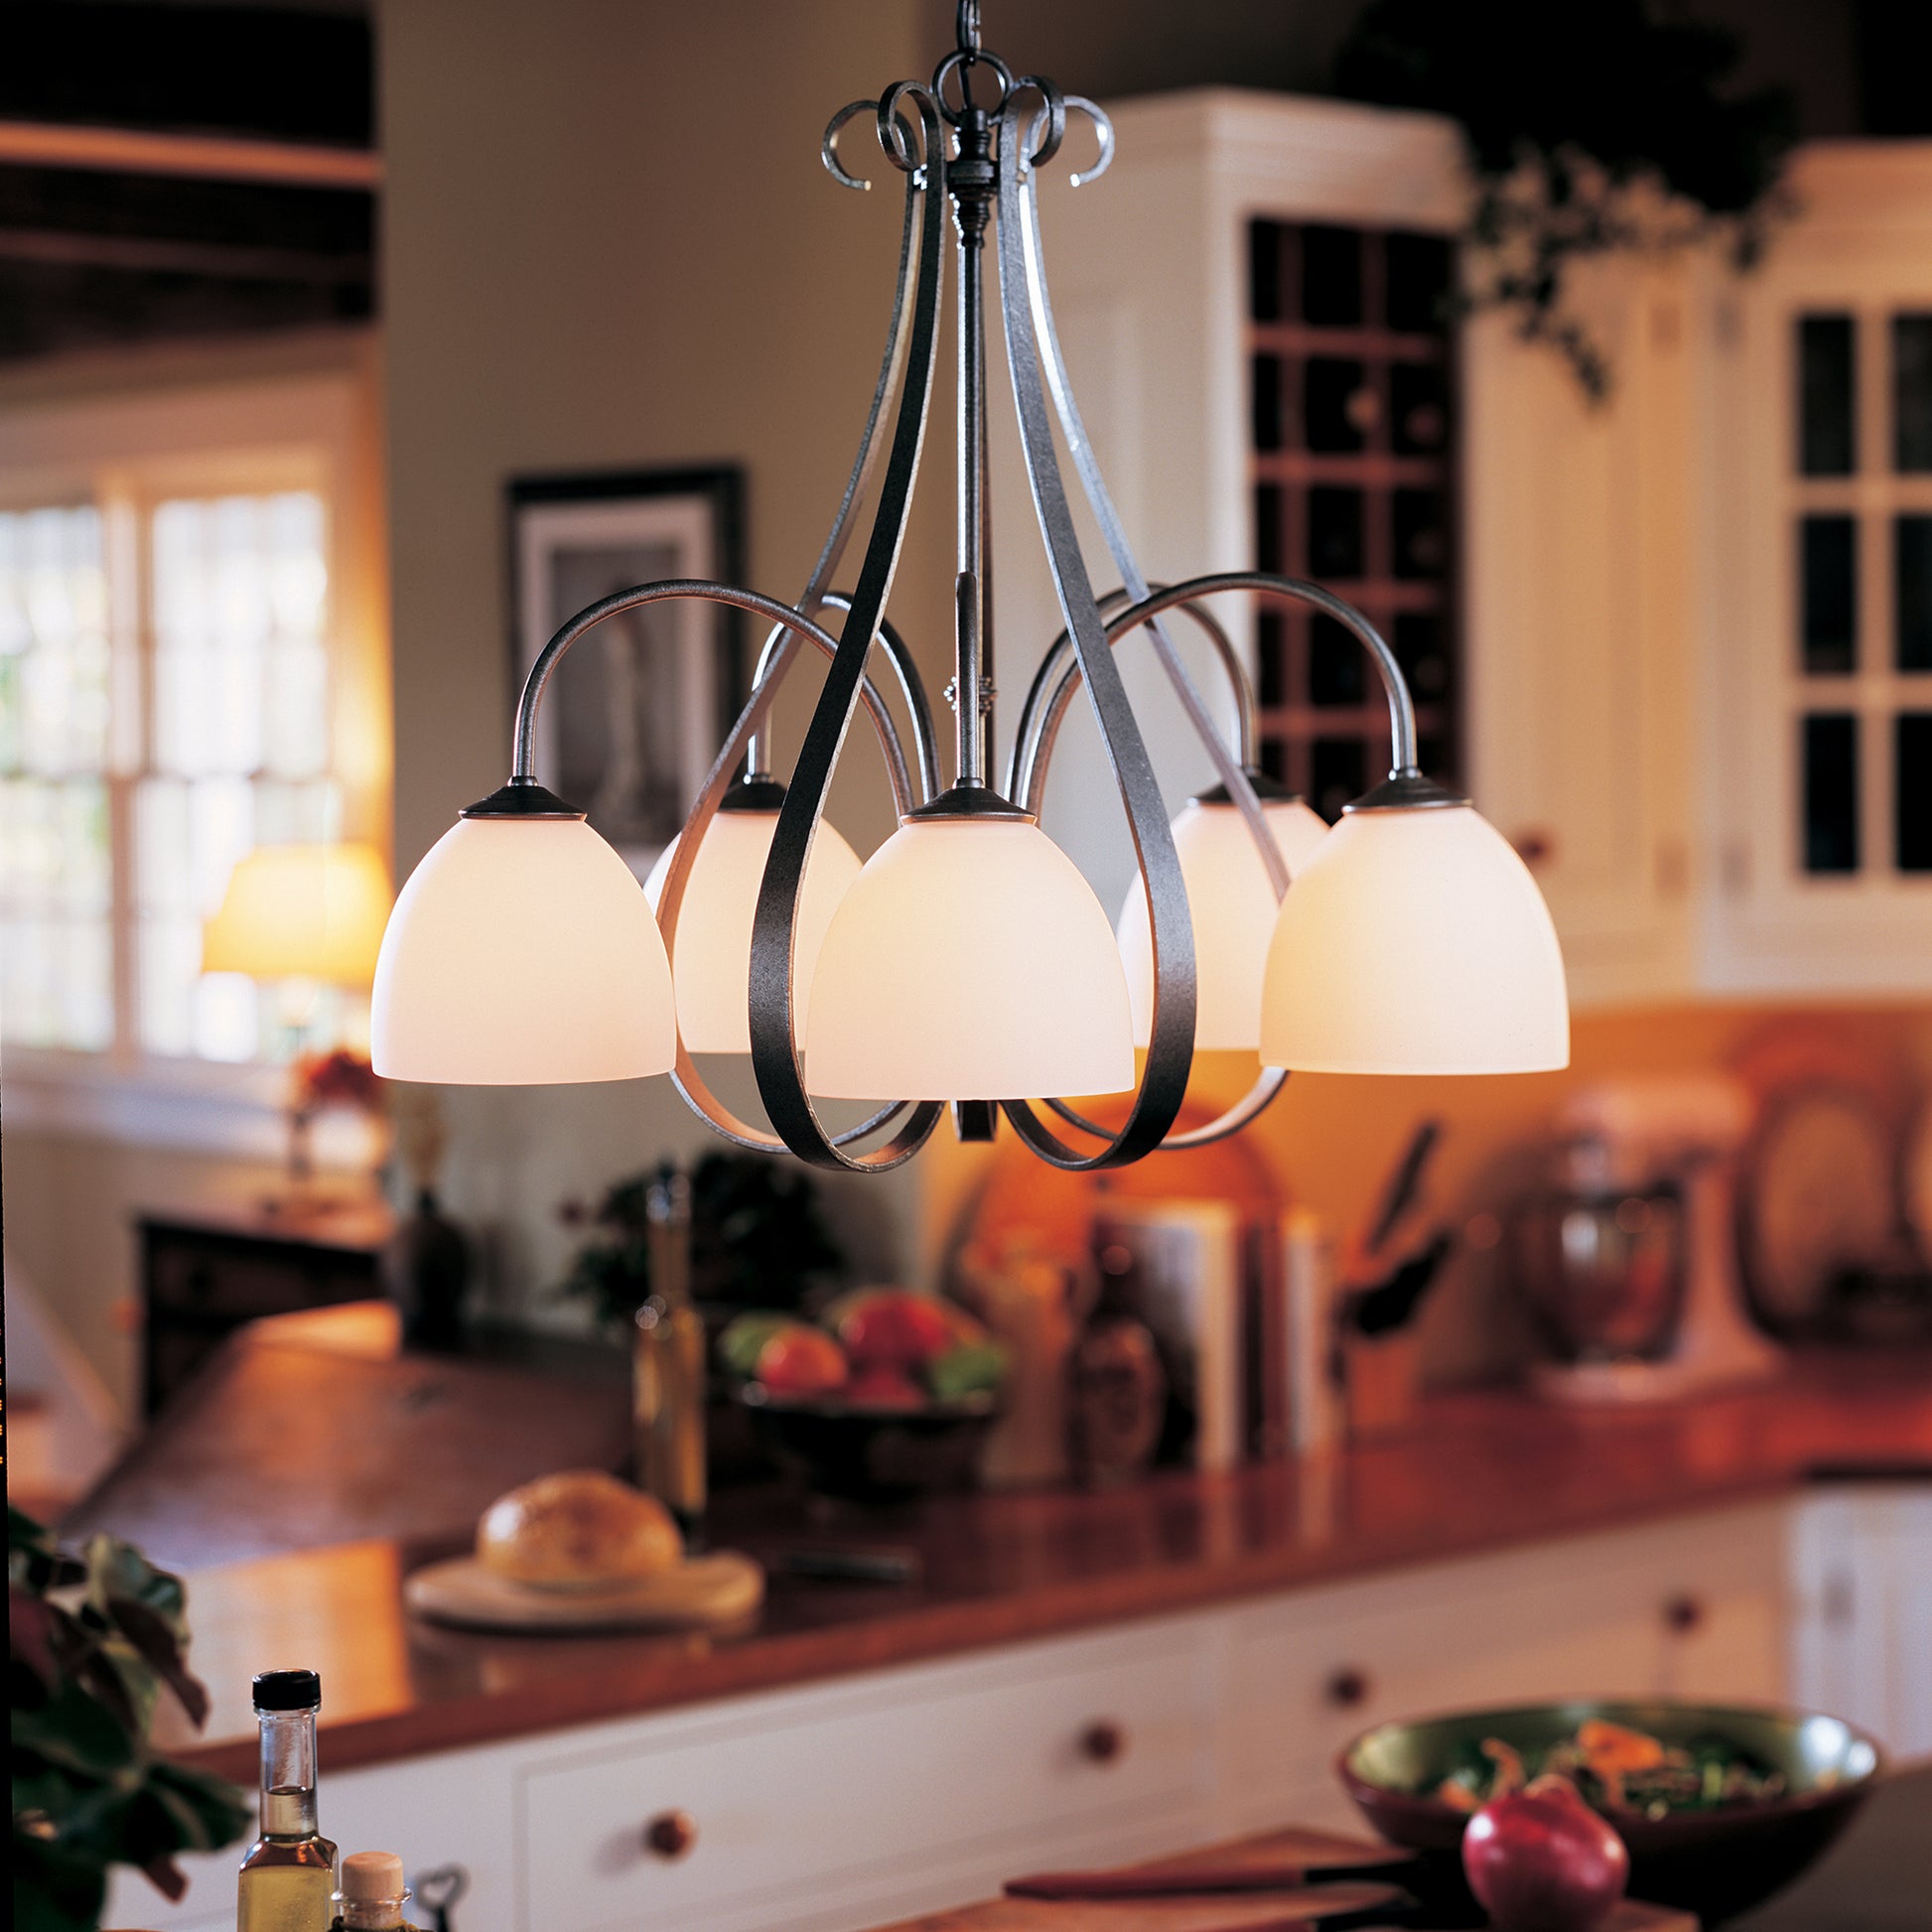 The Hubbardton Forge Sweeping Taper 5-Arm Chandelier brightens up the dining area in the kitchen.